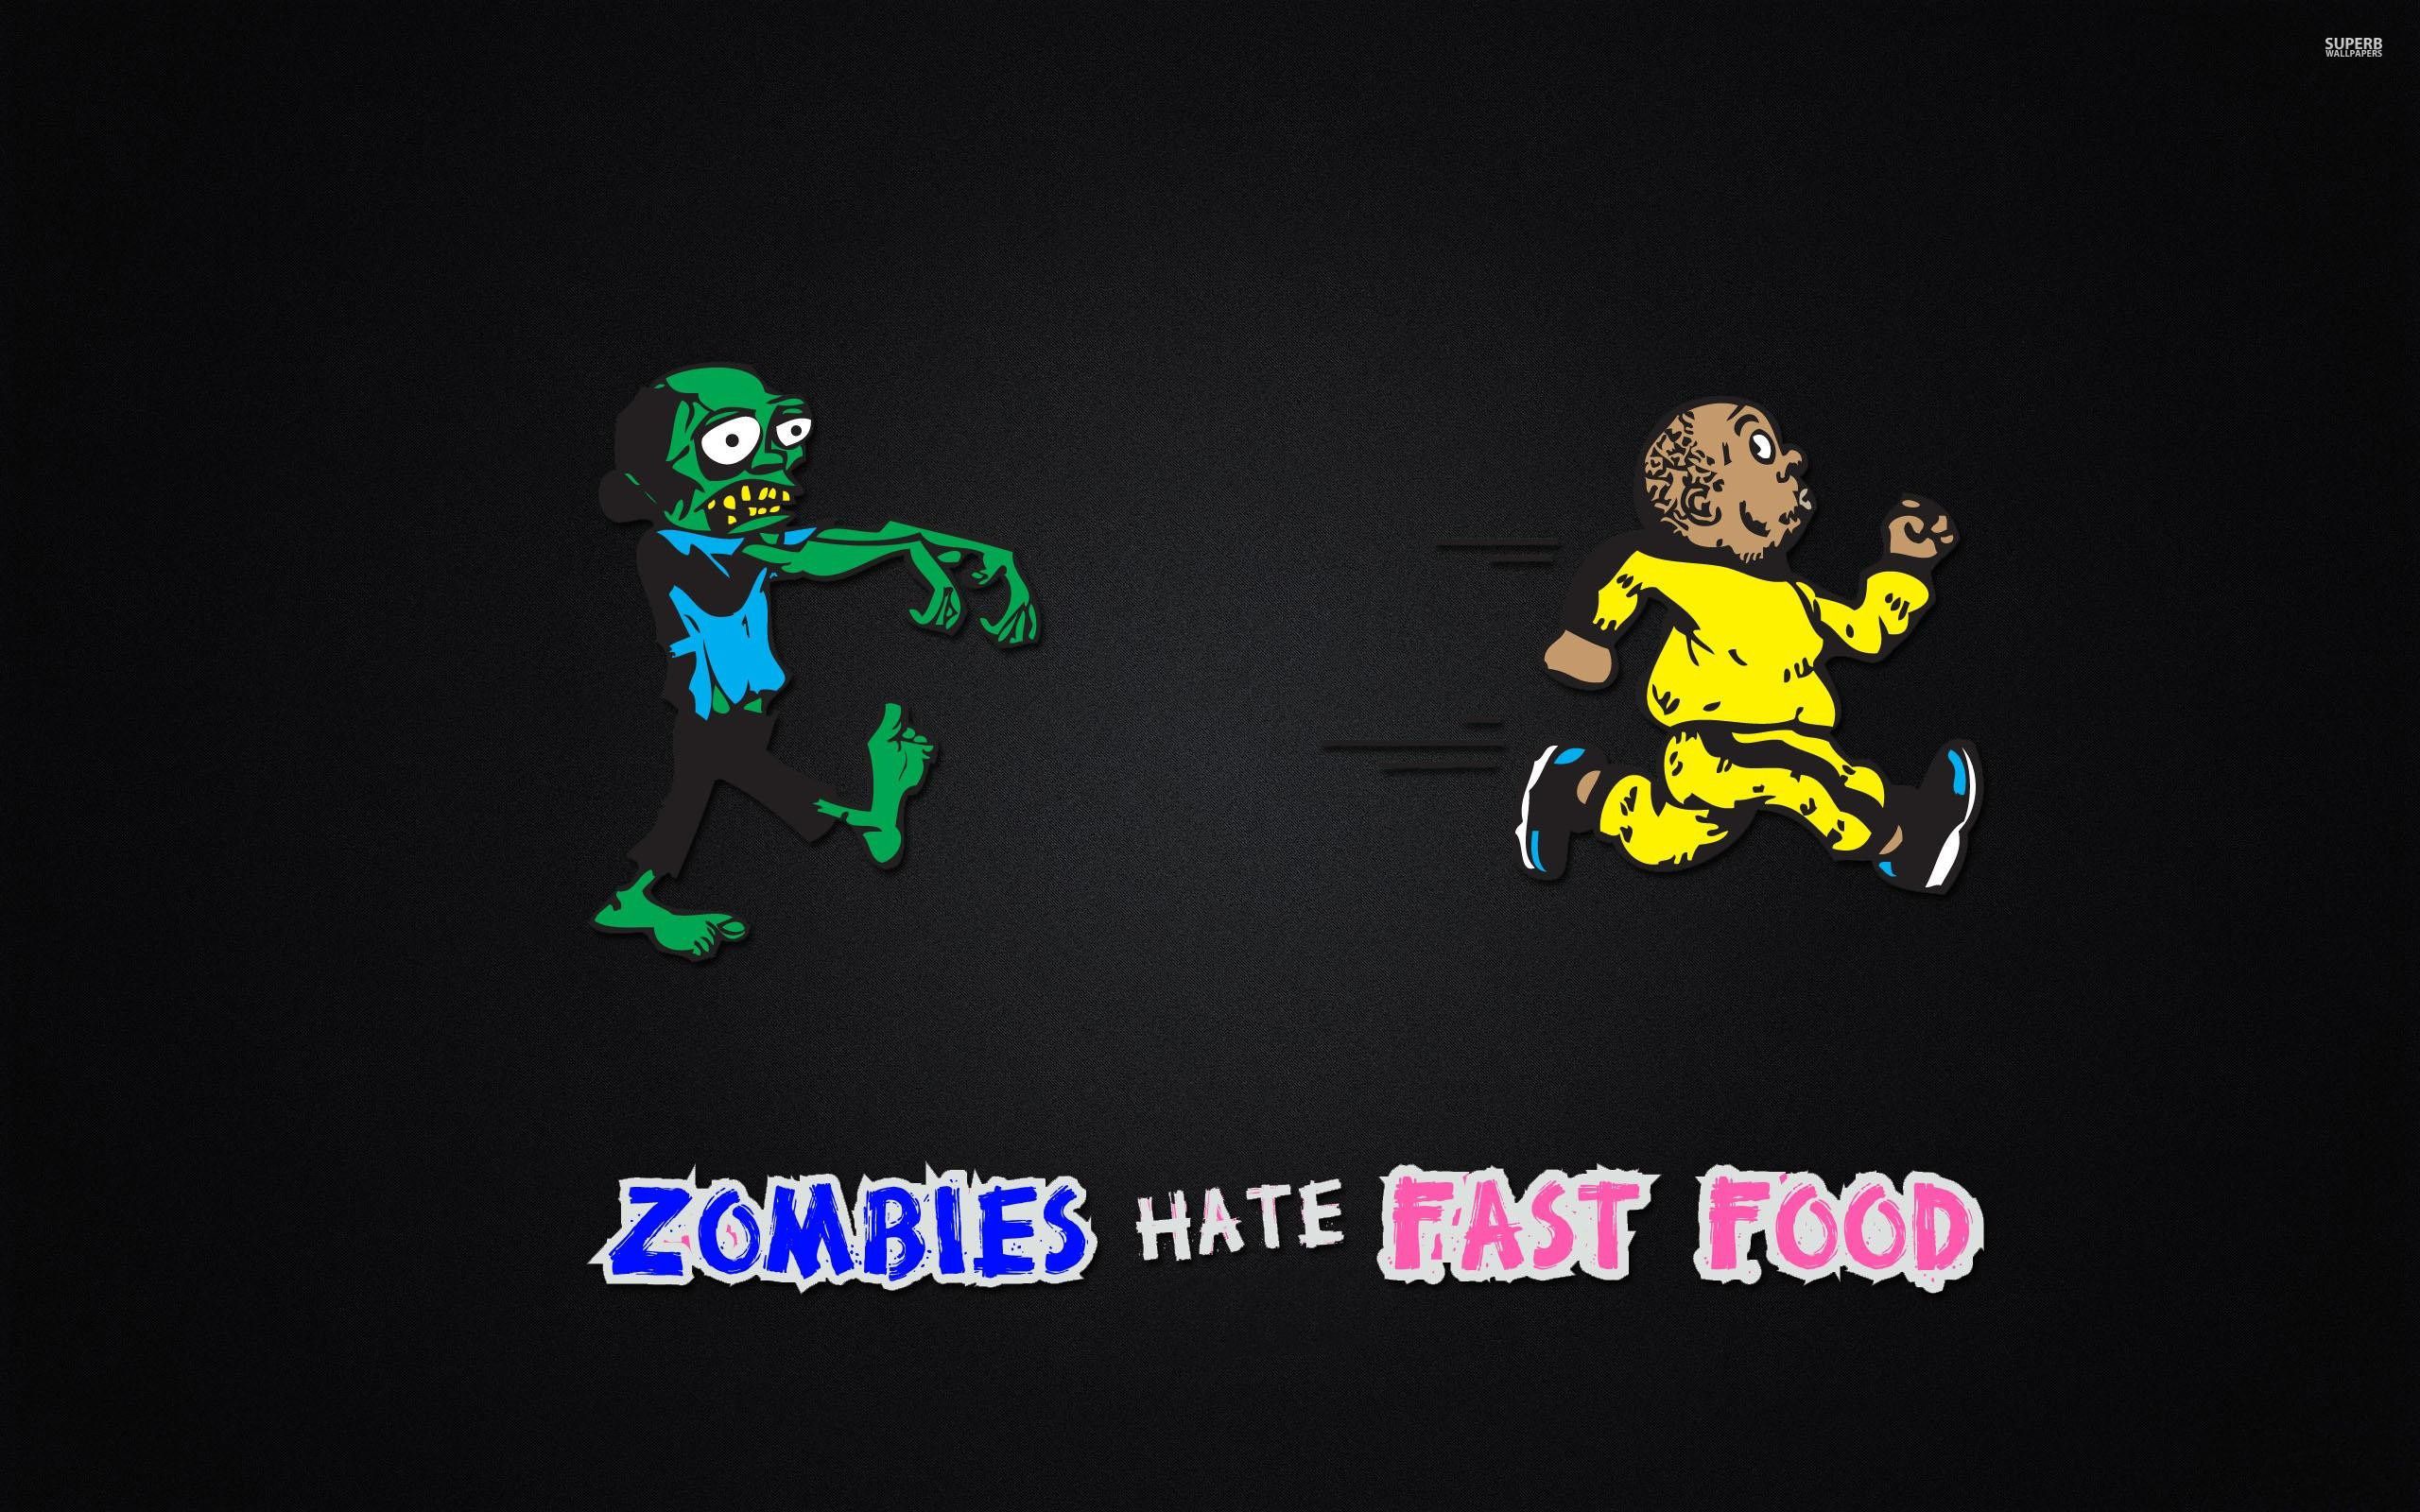 Zombies hate Fast Food wallpaper - Funny wallpapers